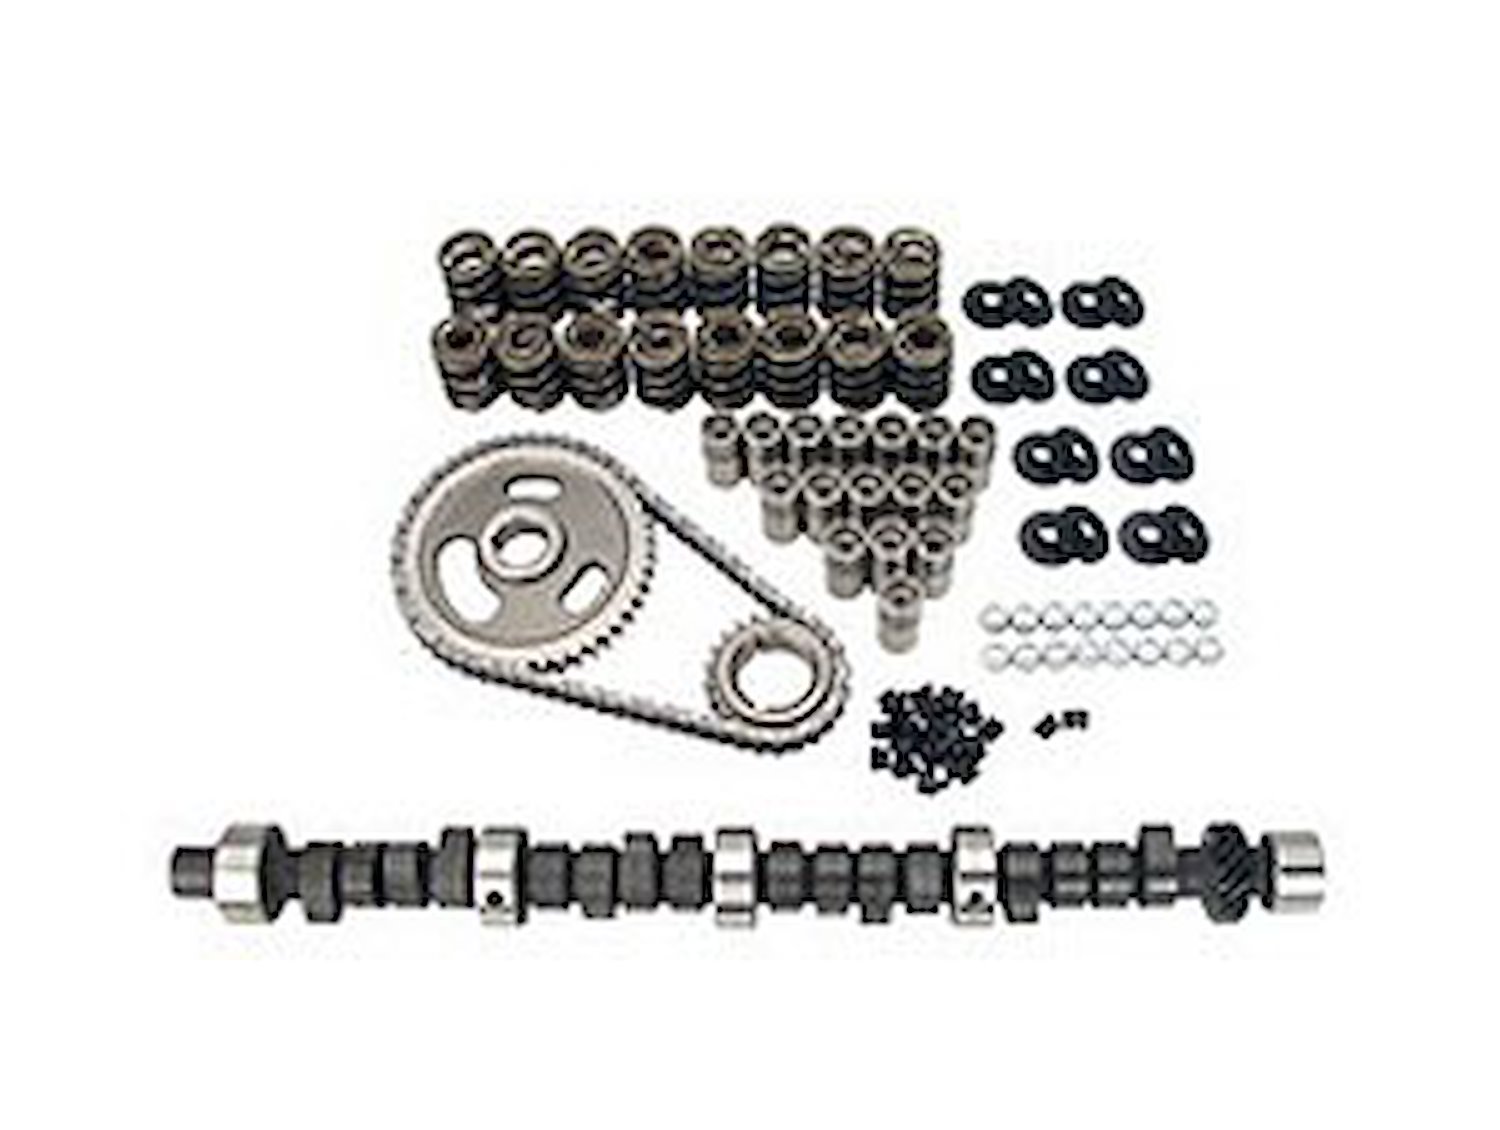 Xtreme Energy 262H Hydraulic Flat Tappet Camshaft Complete Kit Lift: .462" /.470" Duration: 262°/270° RPM Range: 1300-5600